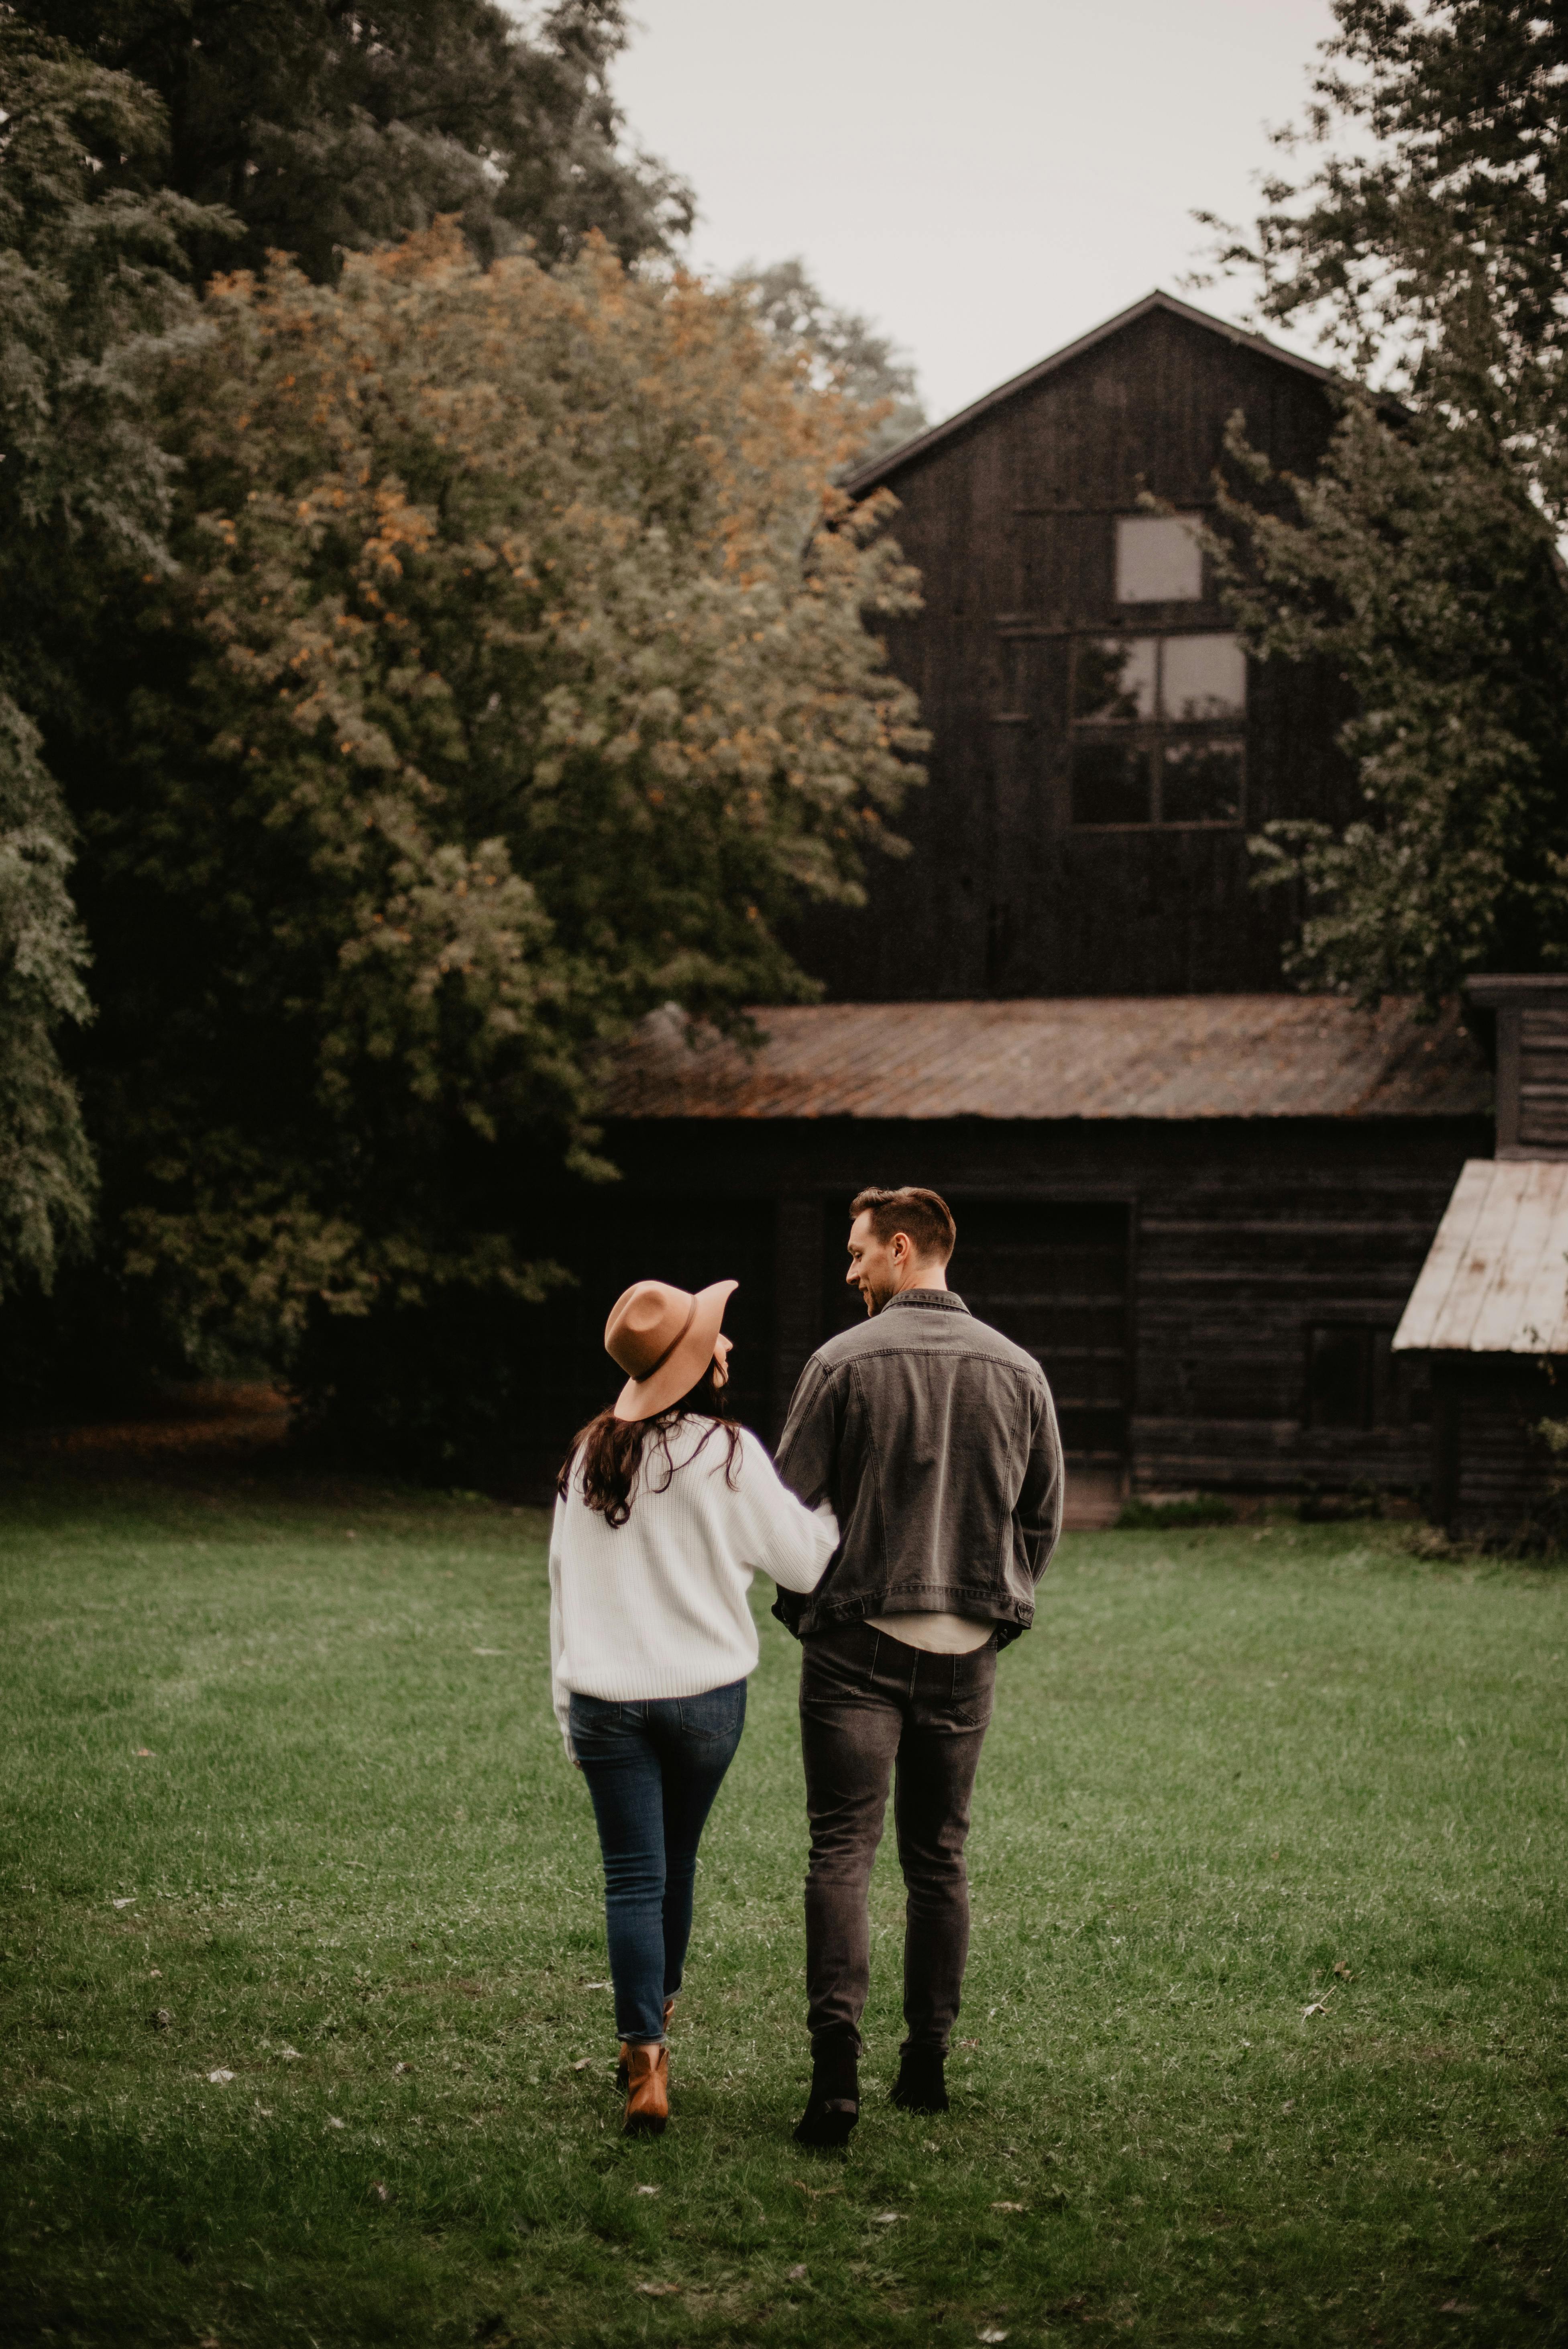 Man and woman greeting happily | Source: Pexels